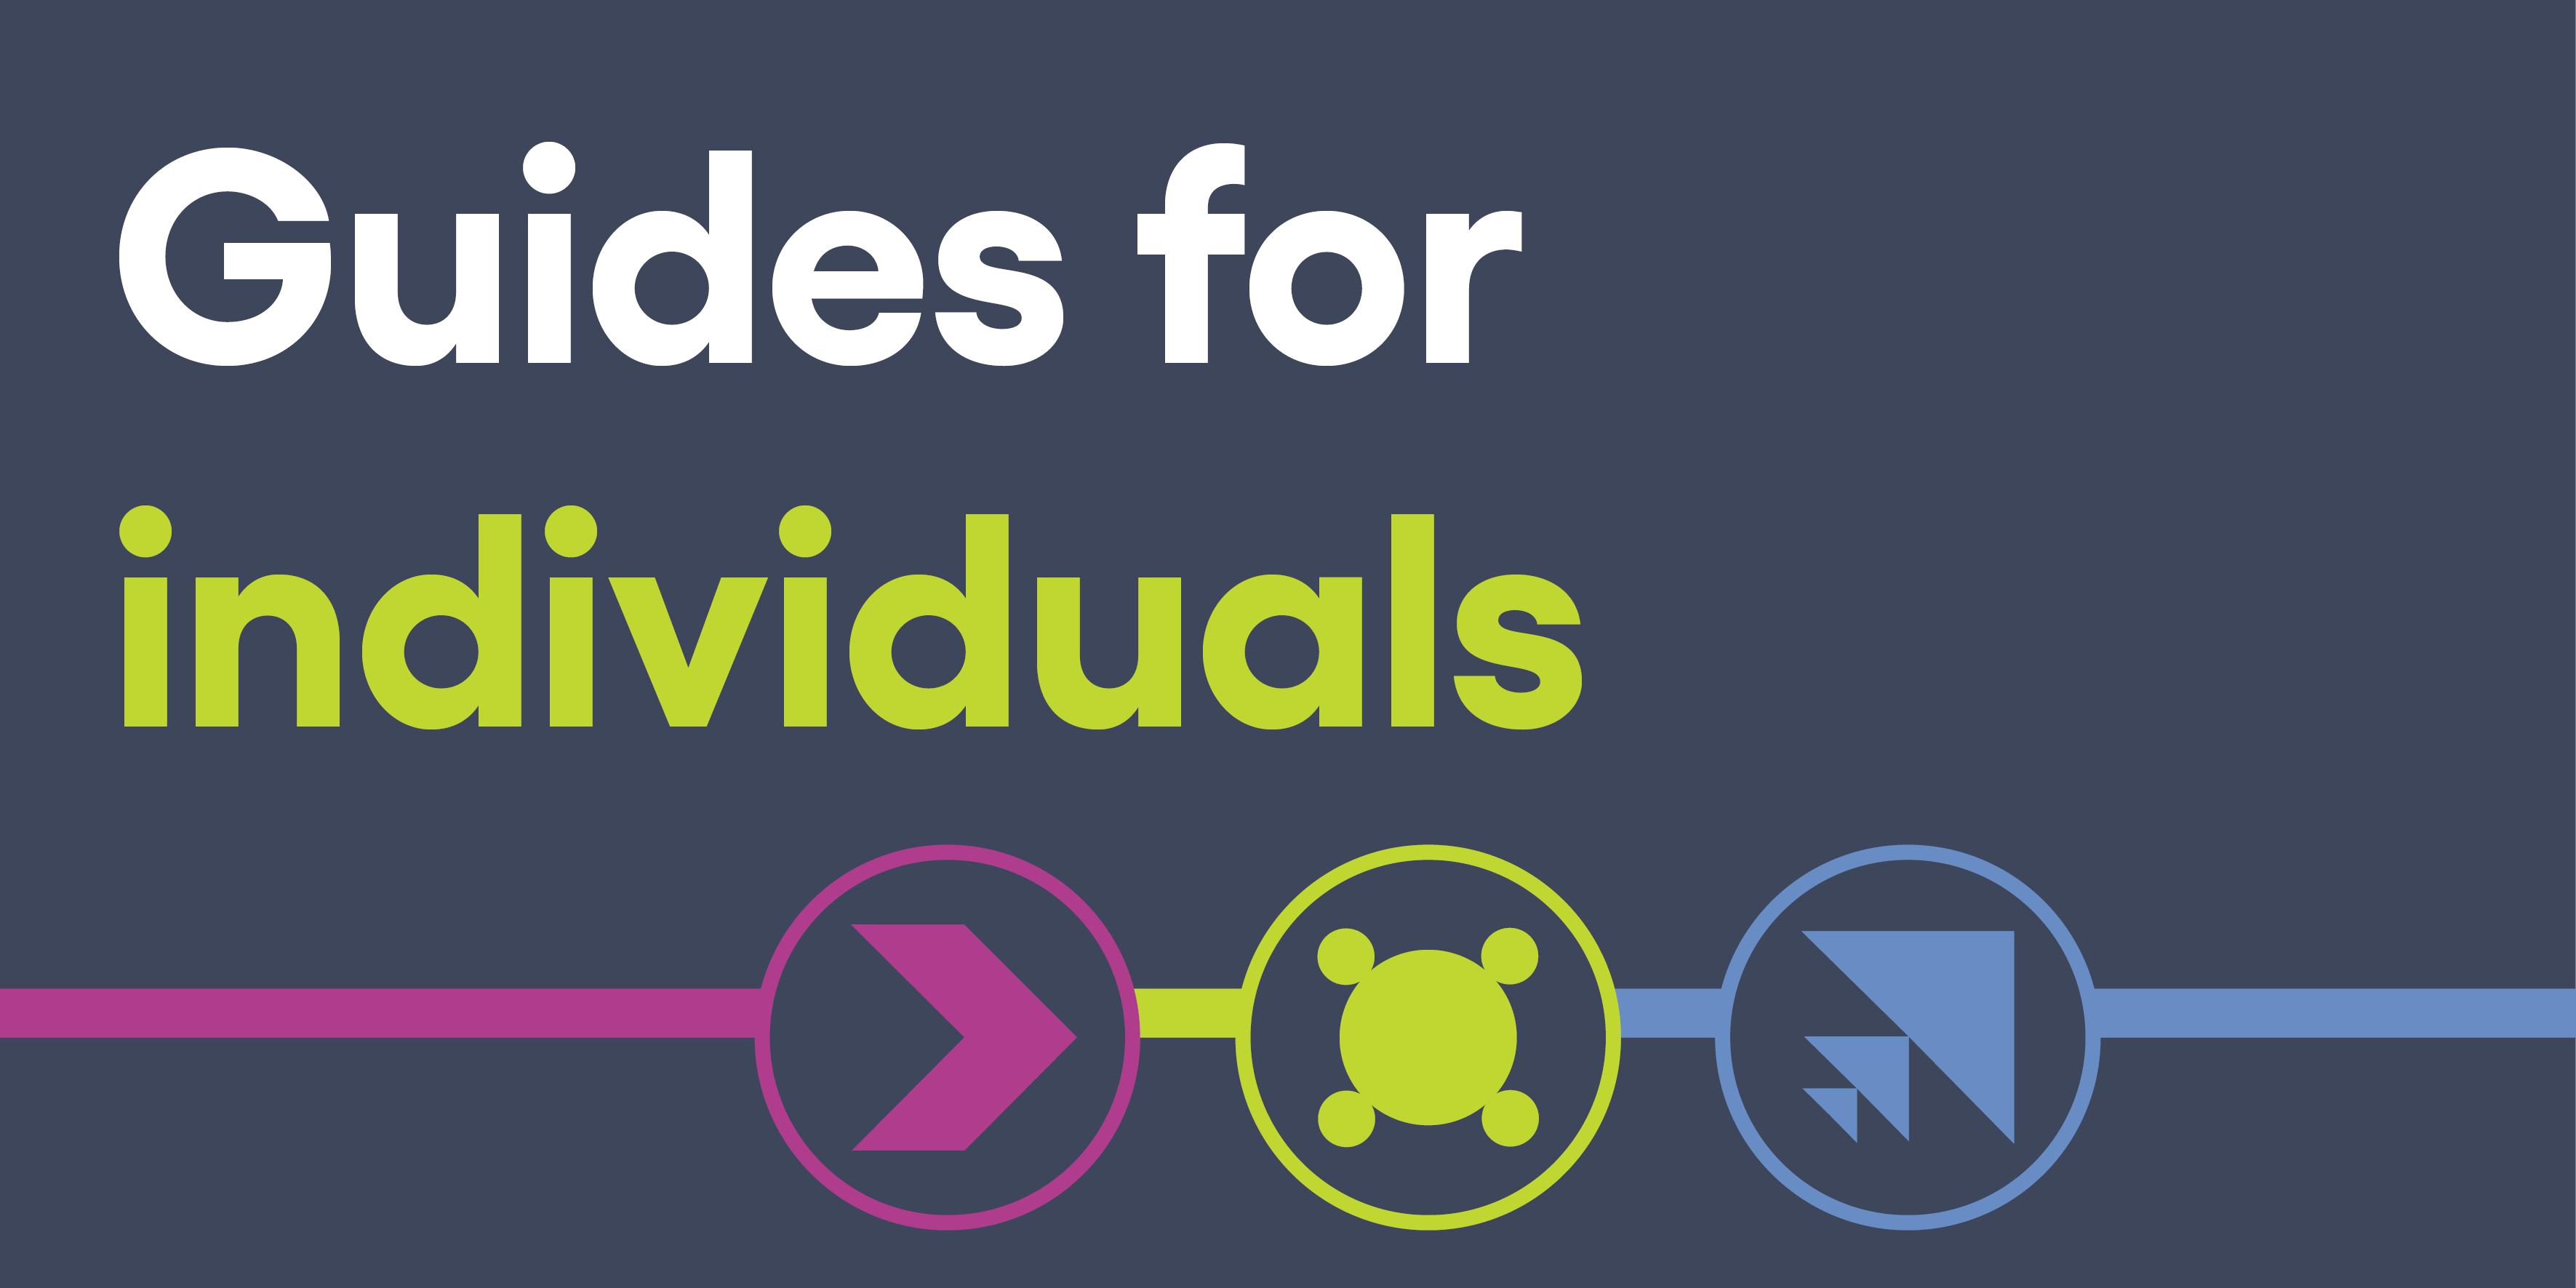 Guides for individuals